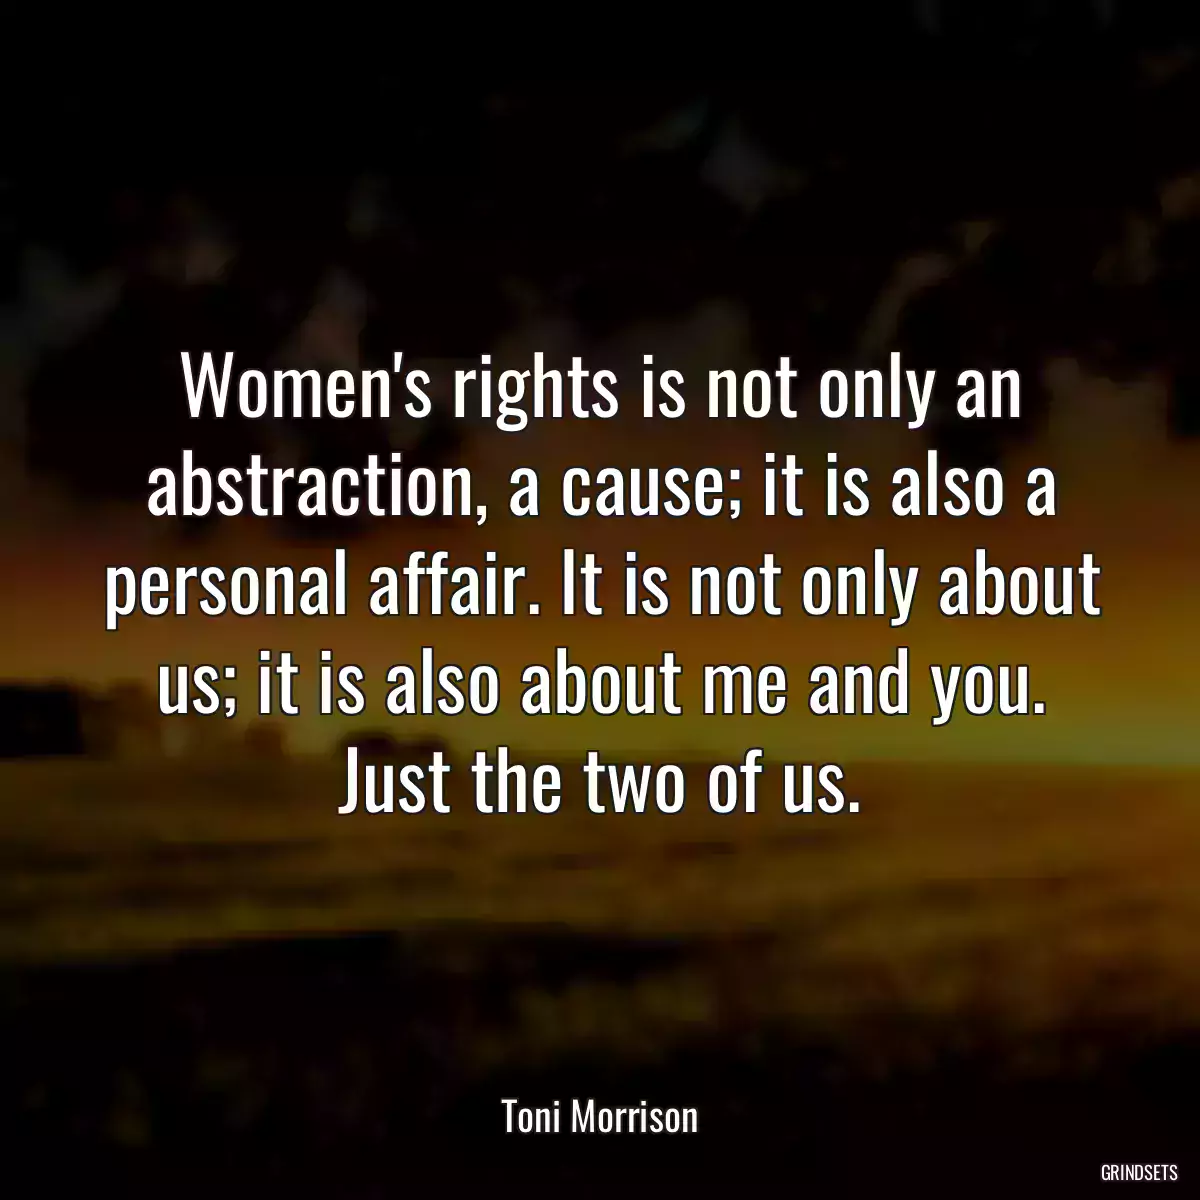 Women\'s rights is not only an abstraction, a cause; it is also a personal affair. It is not only about us; it is also about me and you. Just the two of us.